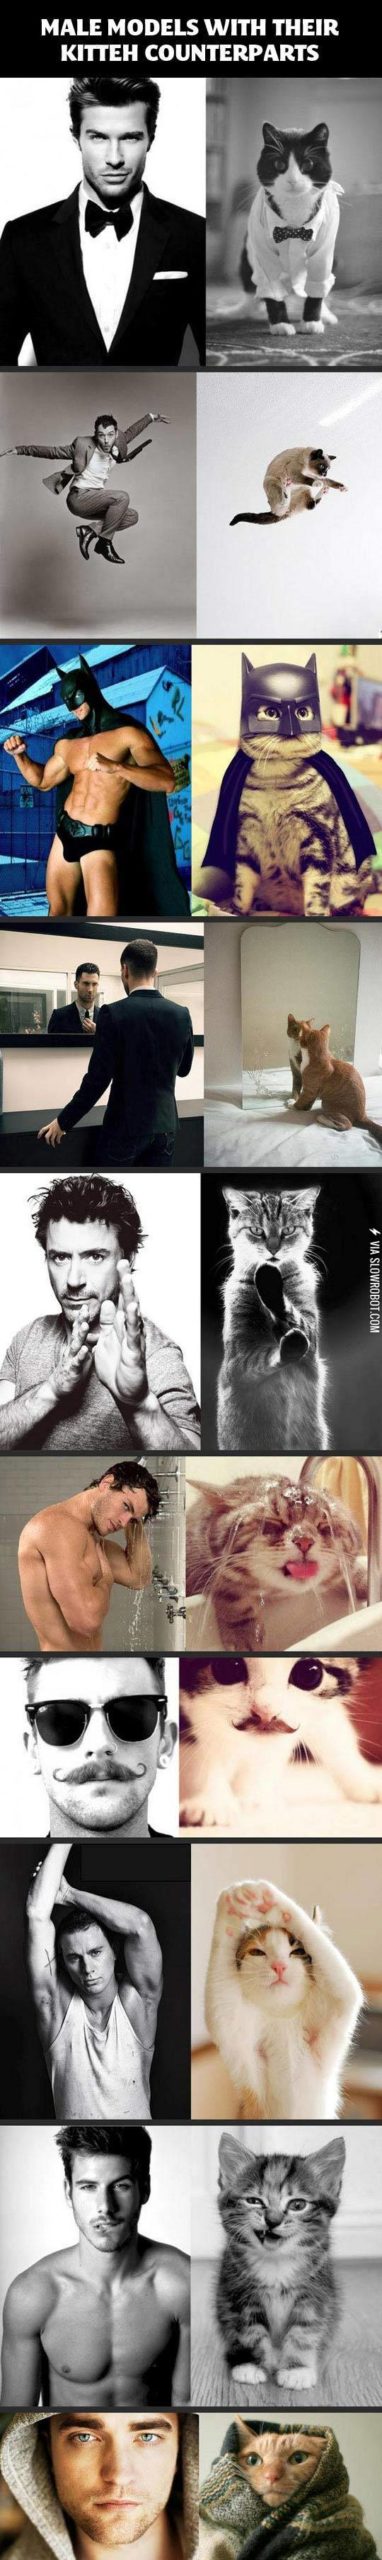 Male+models+and+their+kitteh+counterparts.